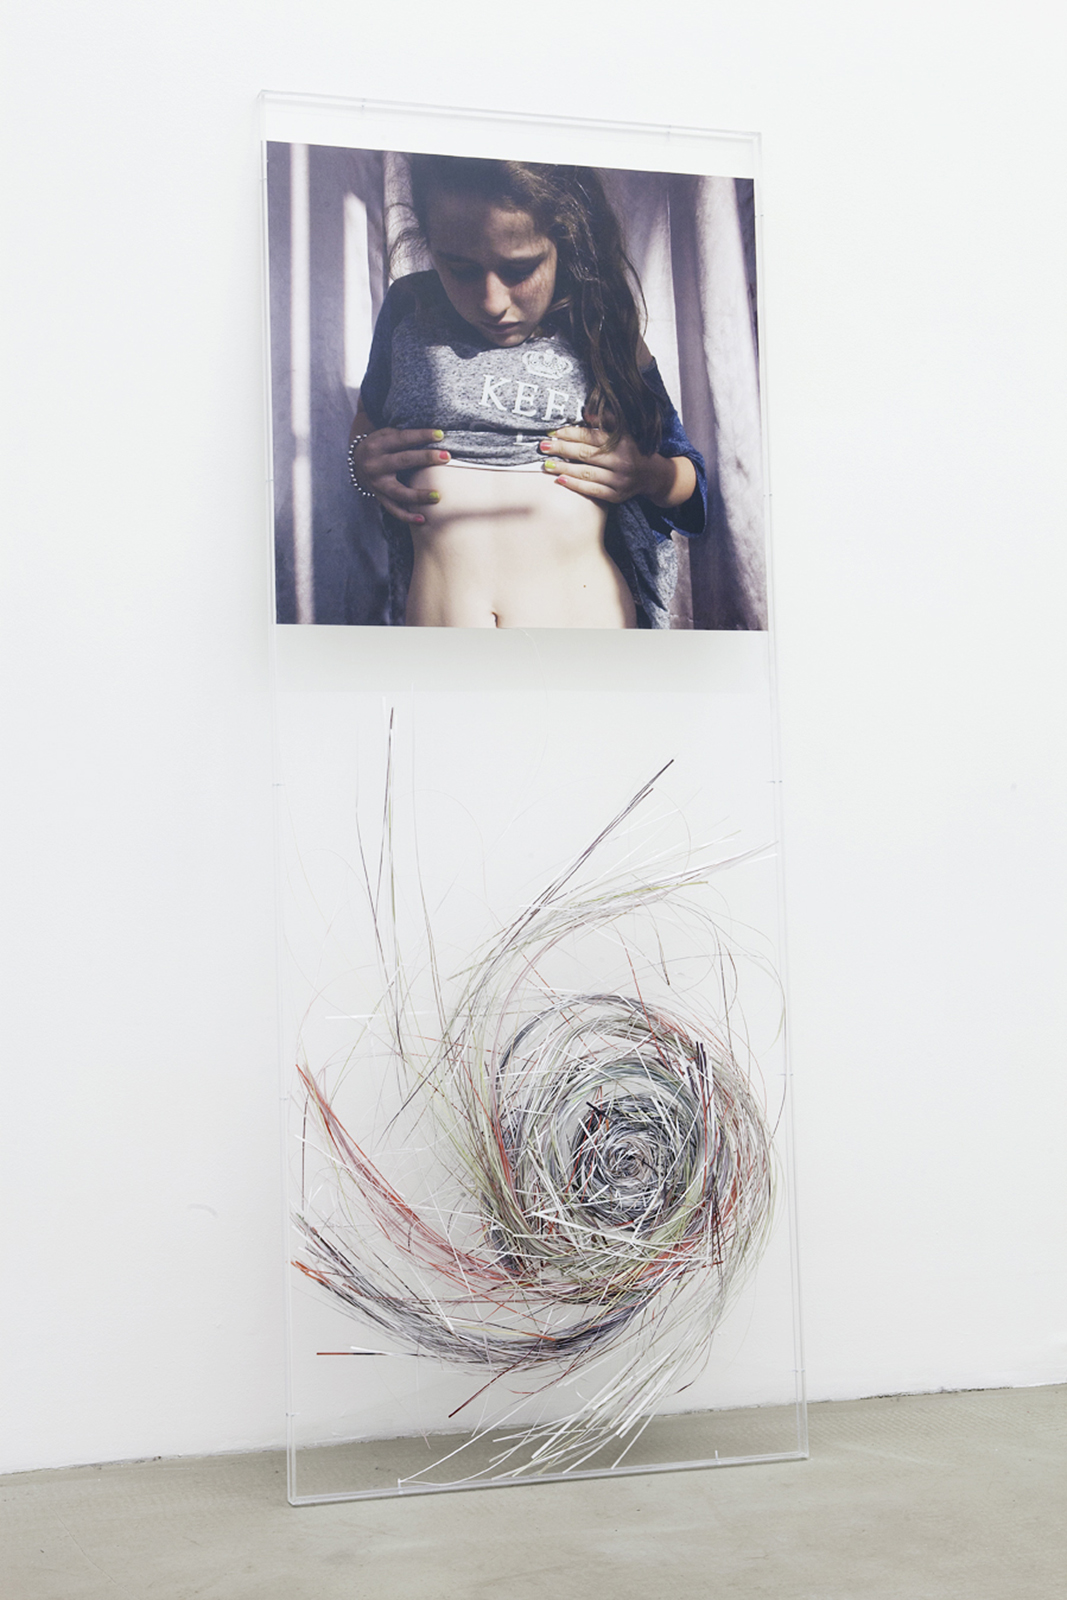 <p>Laura unraveling, with style_2012, 160&#215;60 cm, photo cut in to single, continuous, thread from bellybutton</p>
